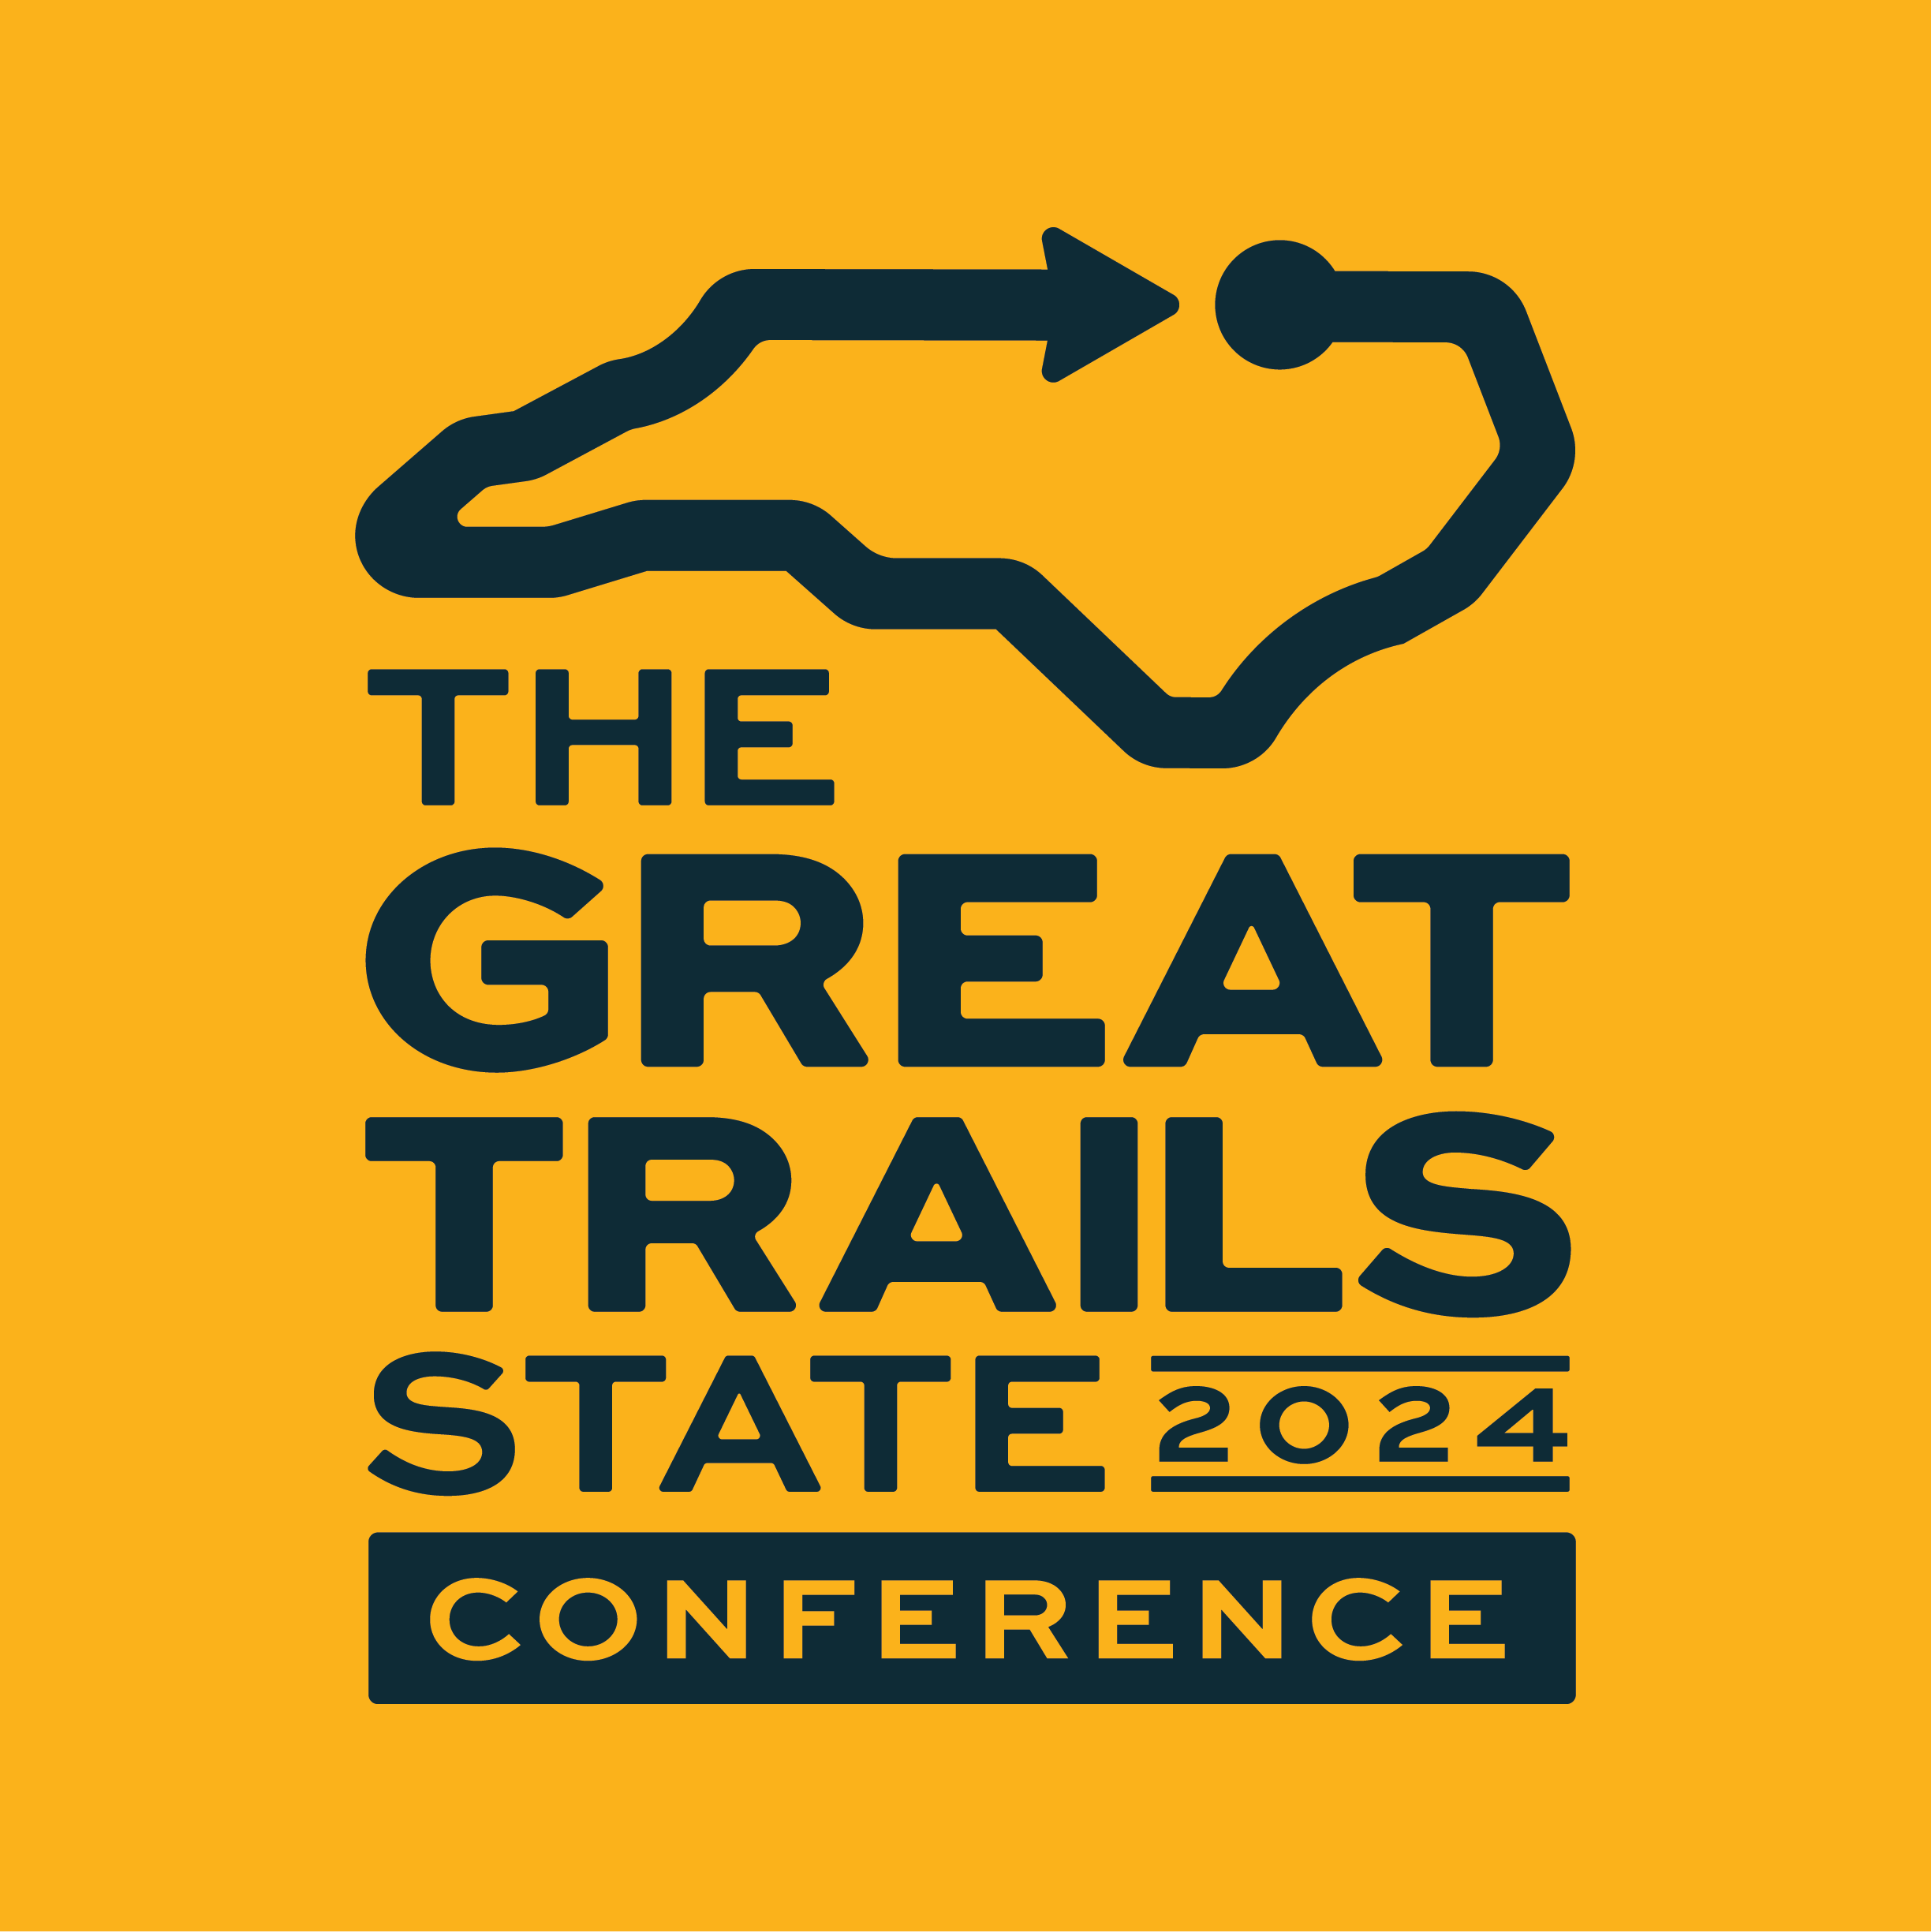 The Great Trails State Conference